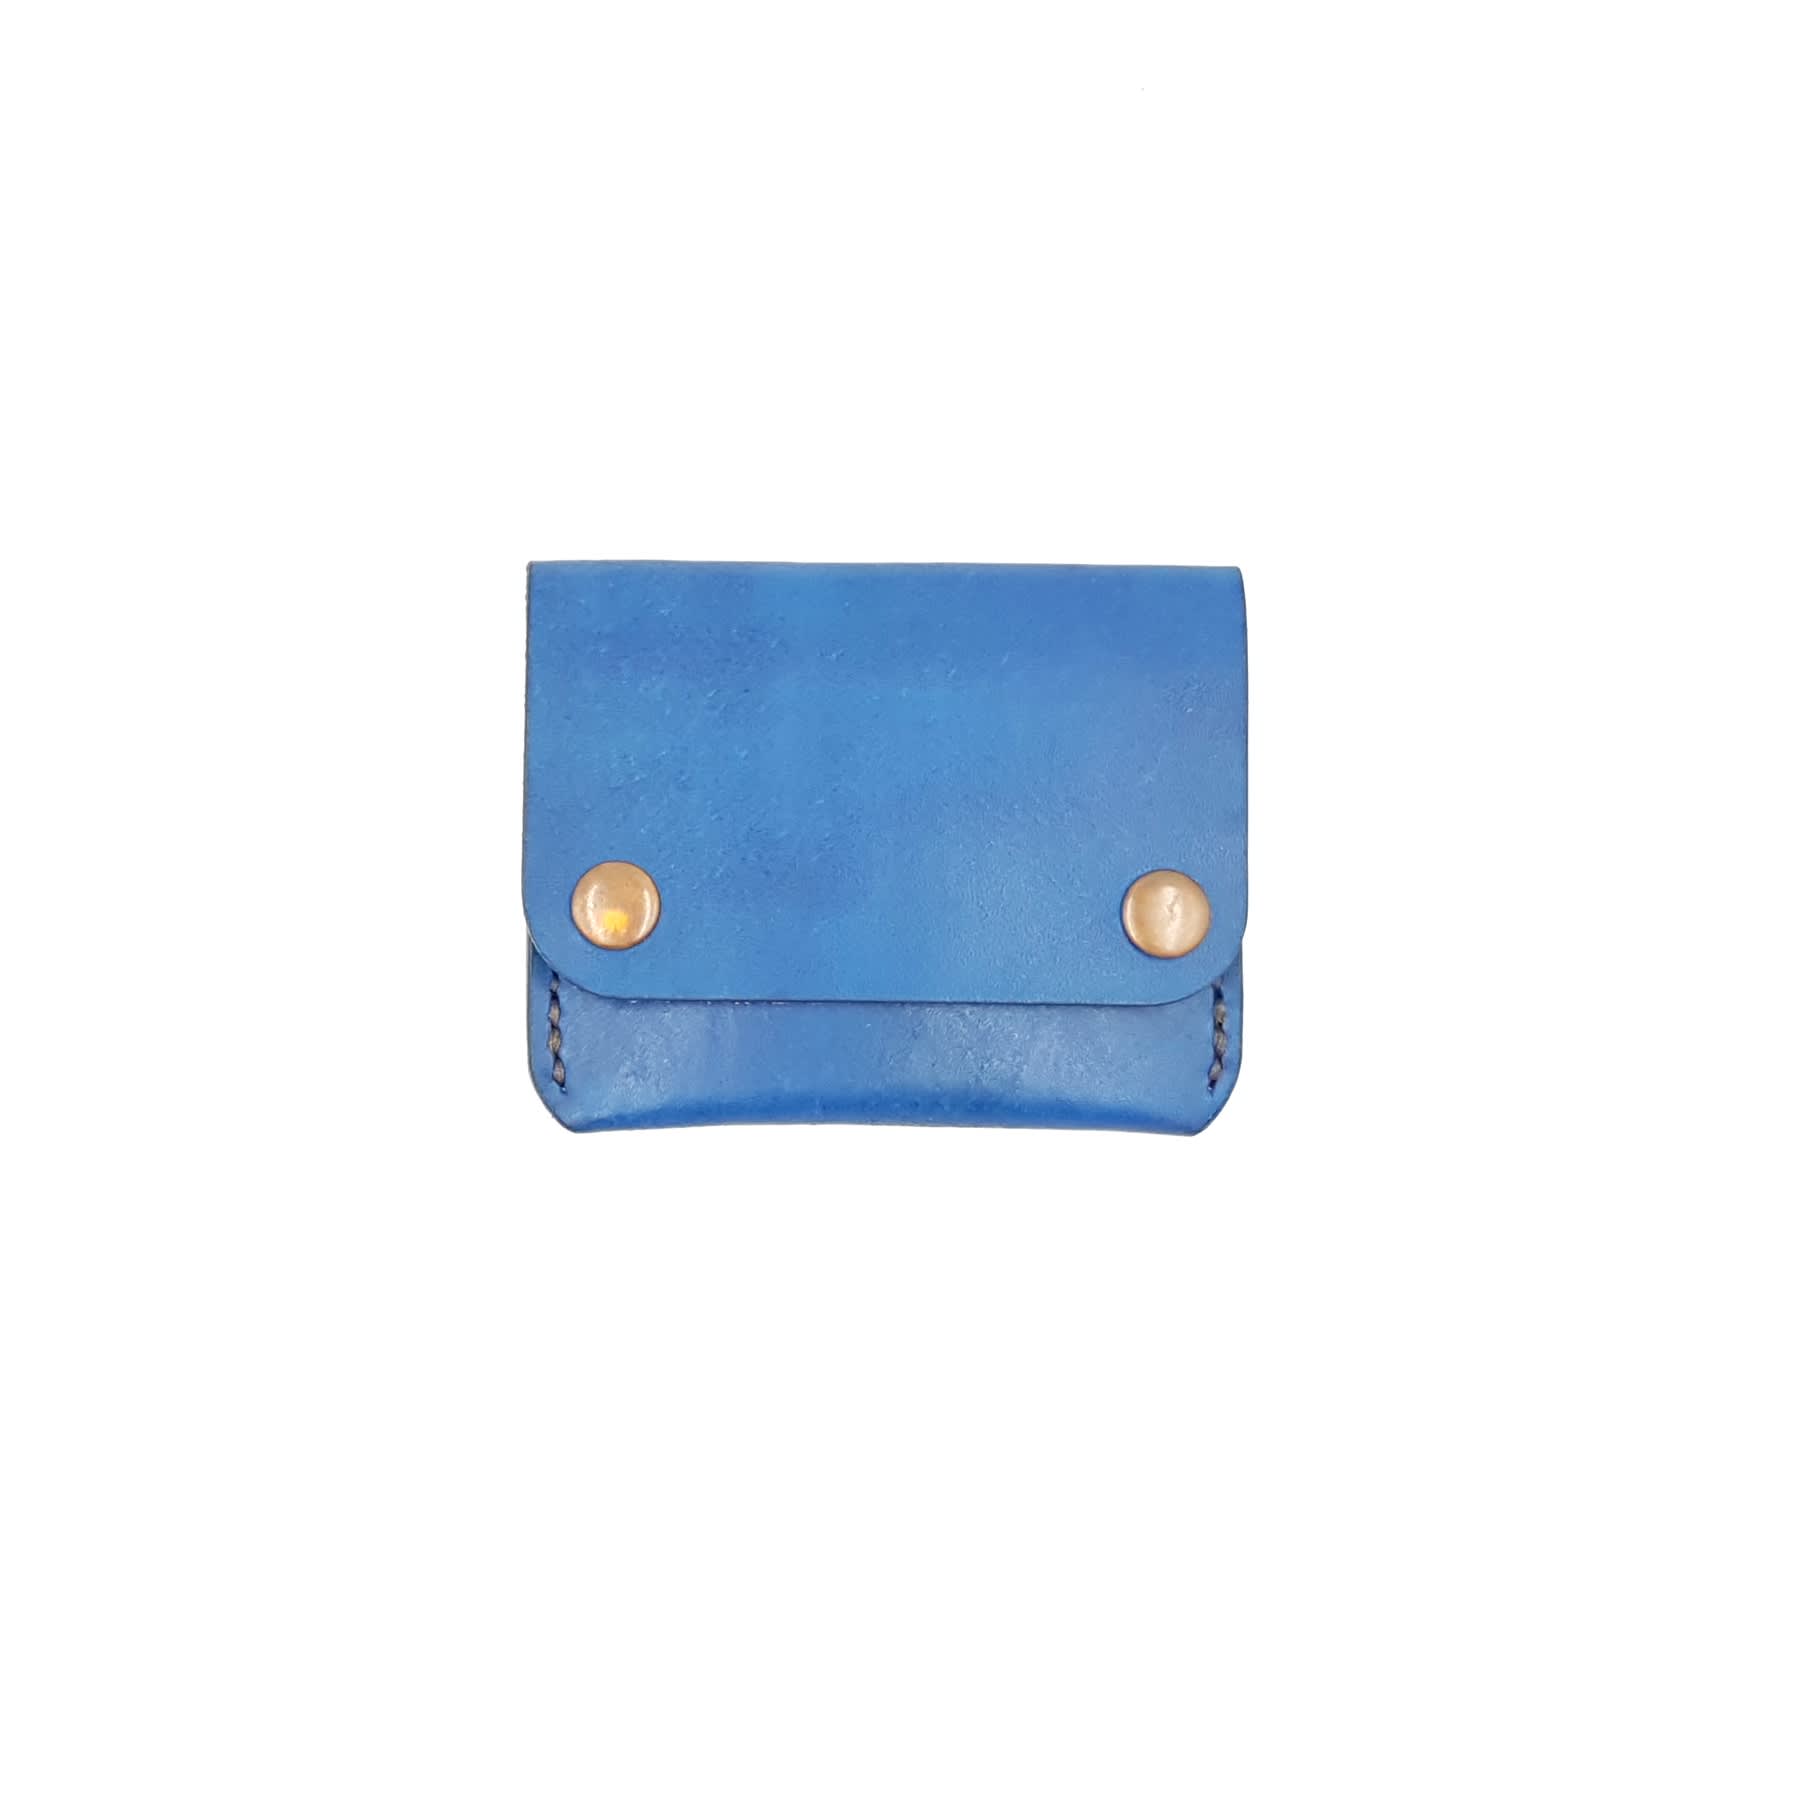 Blue Leather Snap Button Fold Over Cash/Card Wallet - Leather Card Cases -  B26Leather | Handcrafted Goods | Birmingham